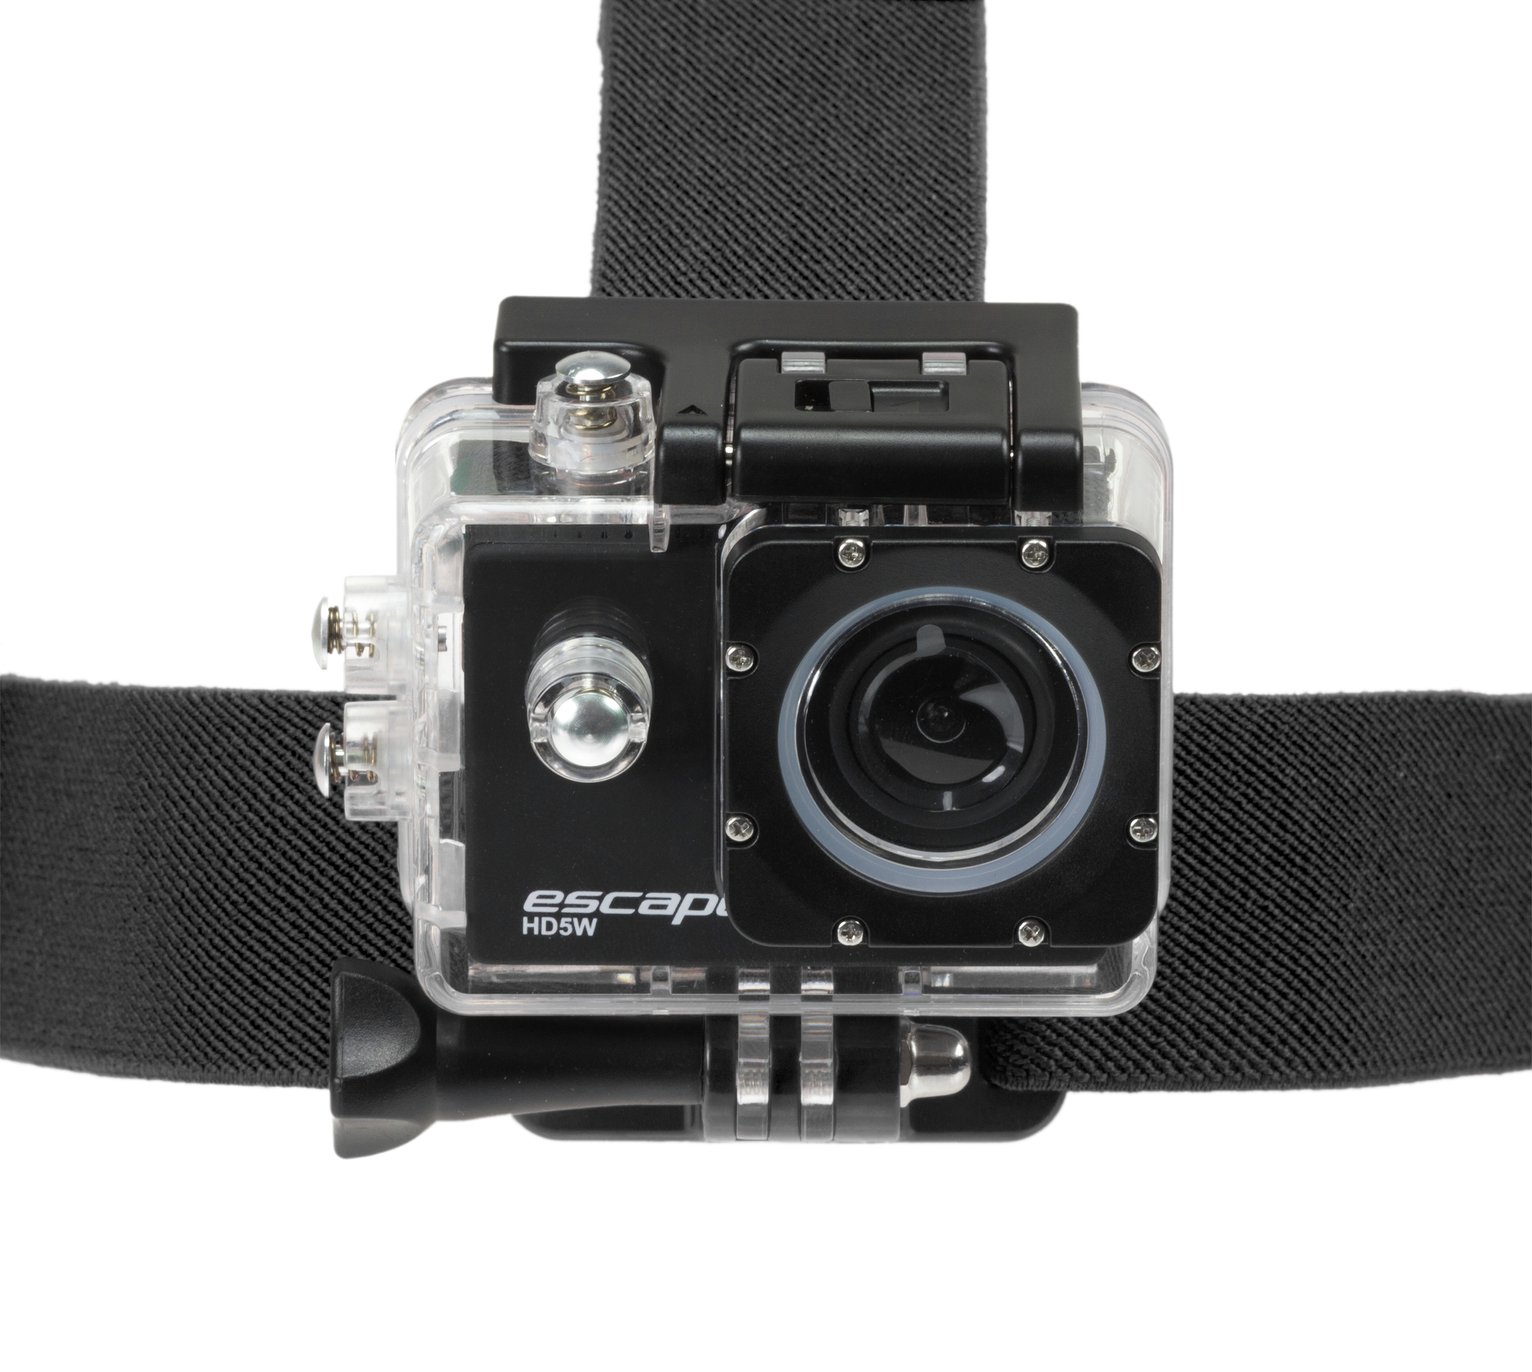 Kitvision Head Strap Mount for Action Cameras Review